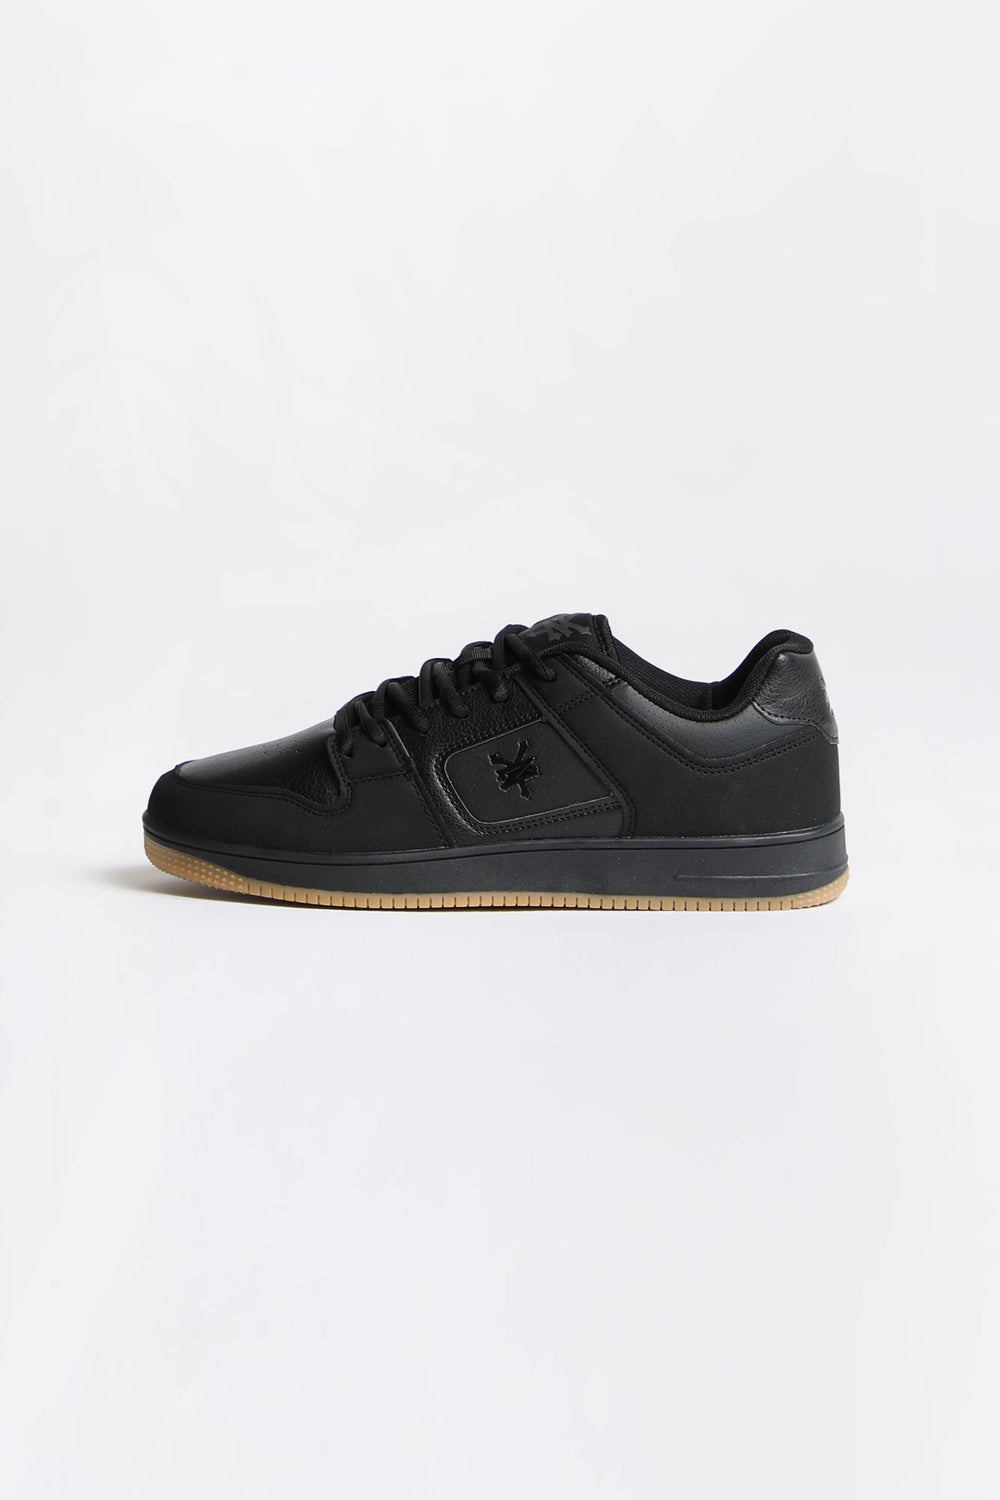 Zoo York Youth Skate Shoes Zoo York Youth Skate Shoes